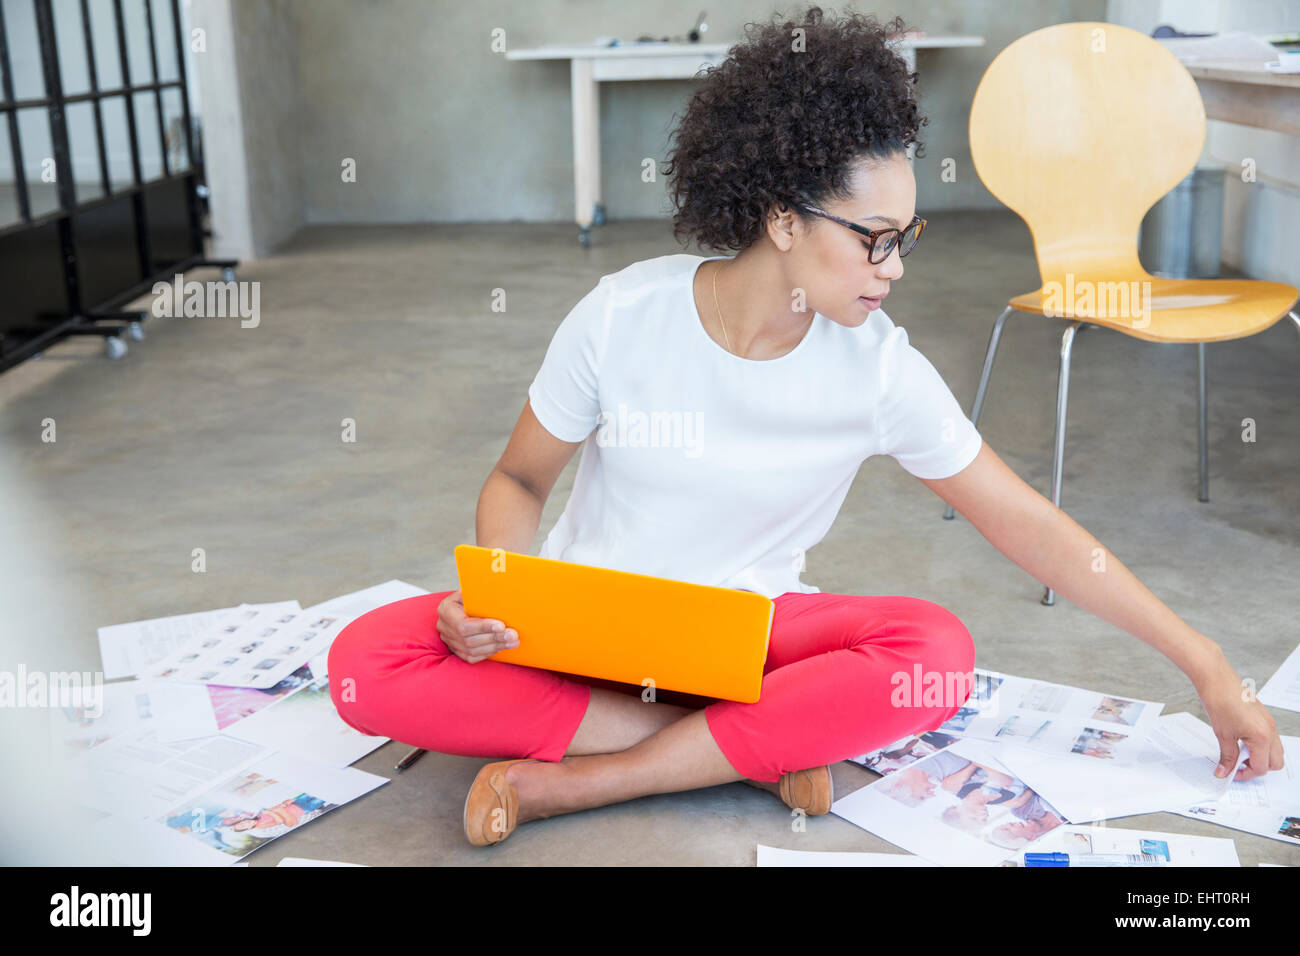 Young woman sitting on floor and working with laptop Stock Photo